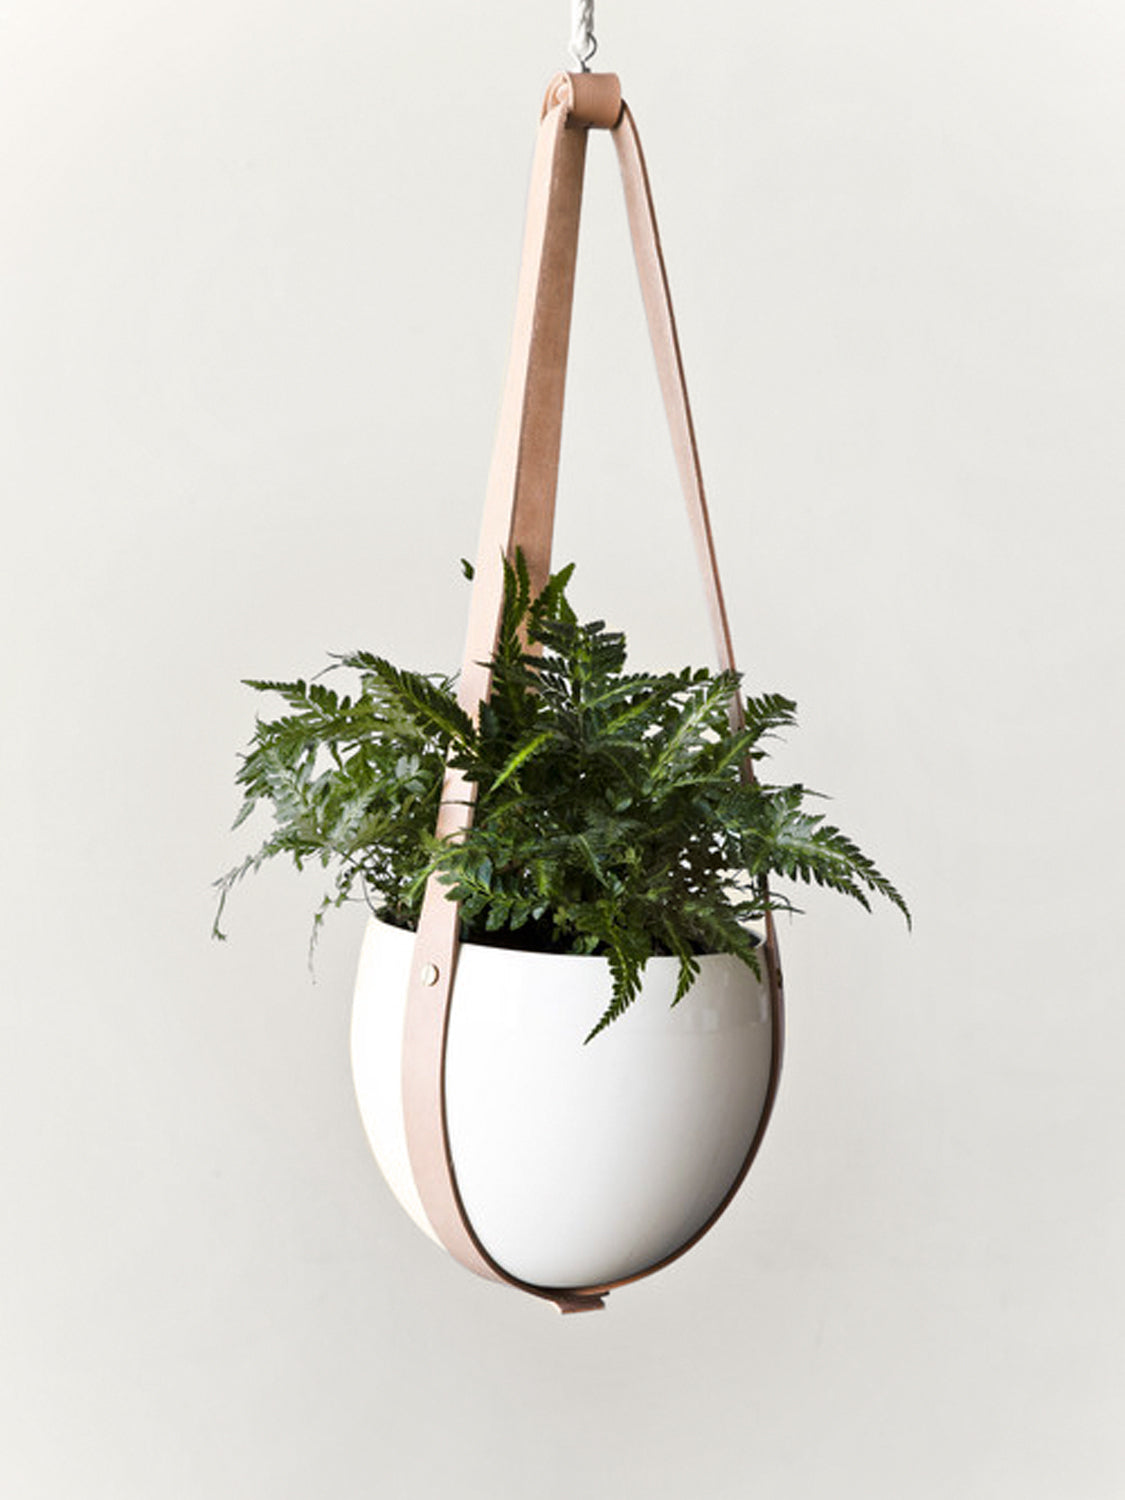 Ceiling hanging spora planter in organic shape with leather straps